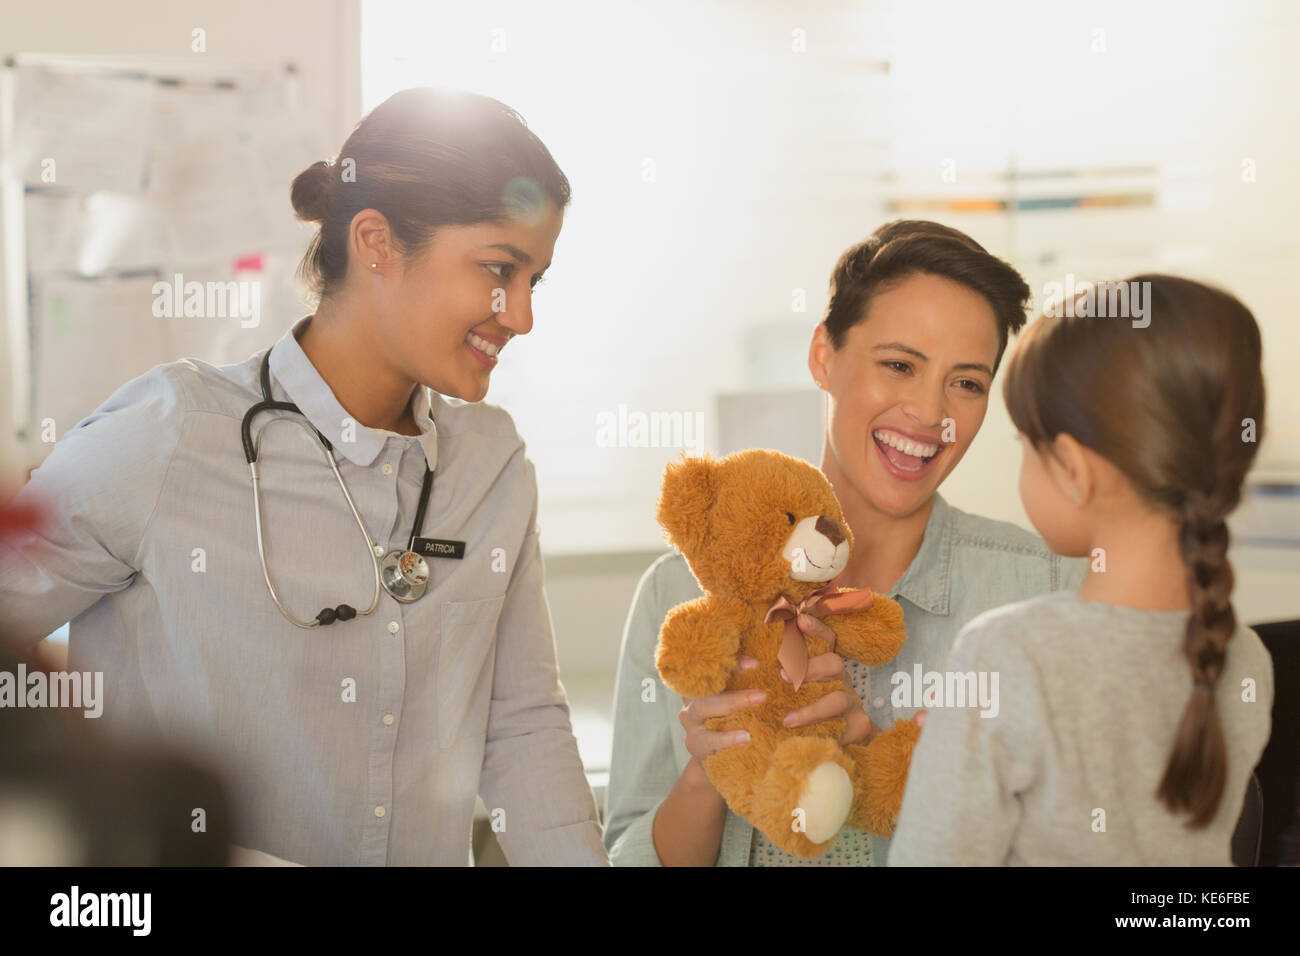 Smiling female pediatrician and mother showing teddy bear to girl patient in examination room Stock Photo